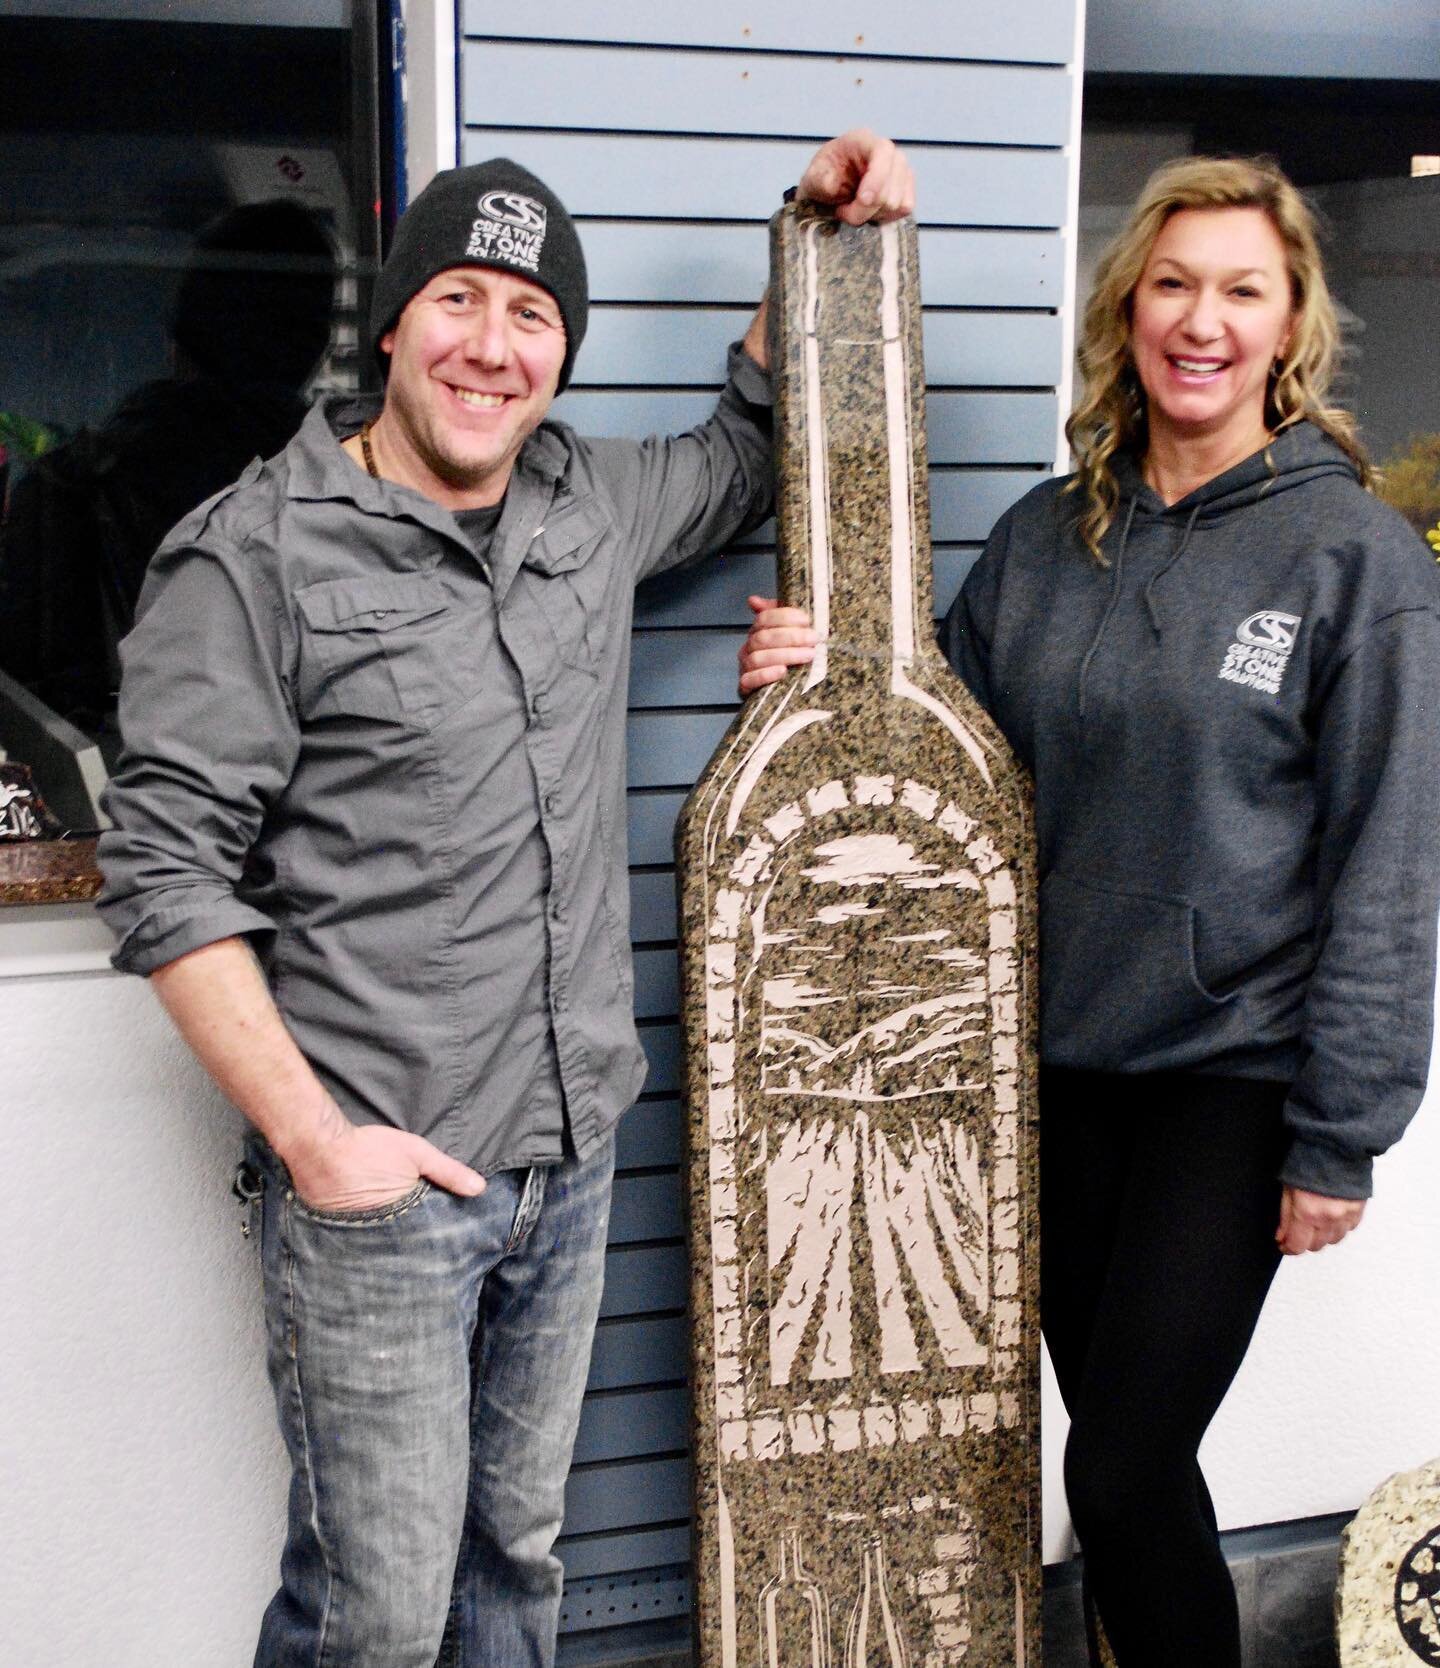 We pay attention to detail ✨

Our artists create personalized granite engravings and art in the form of memorial plaques, commercial signage, address signs, and more. This wine bottle art piece is particularly special because it is featuring a snapsh